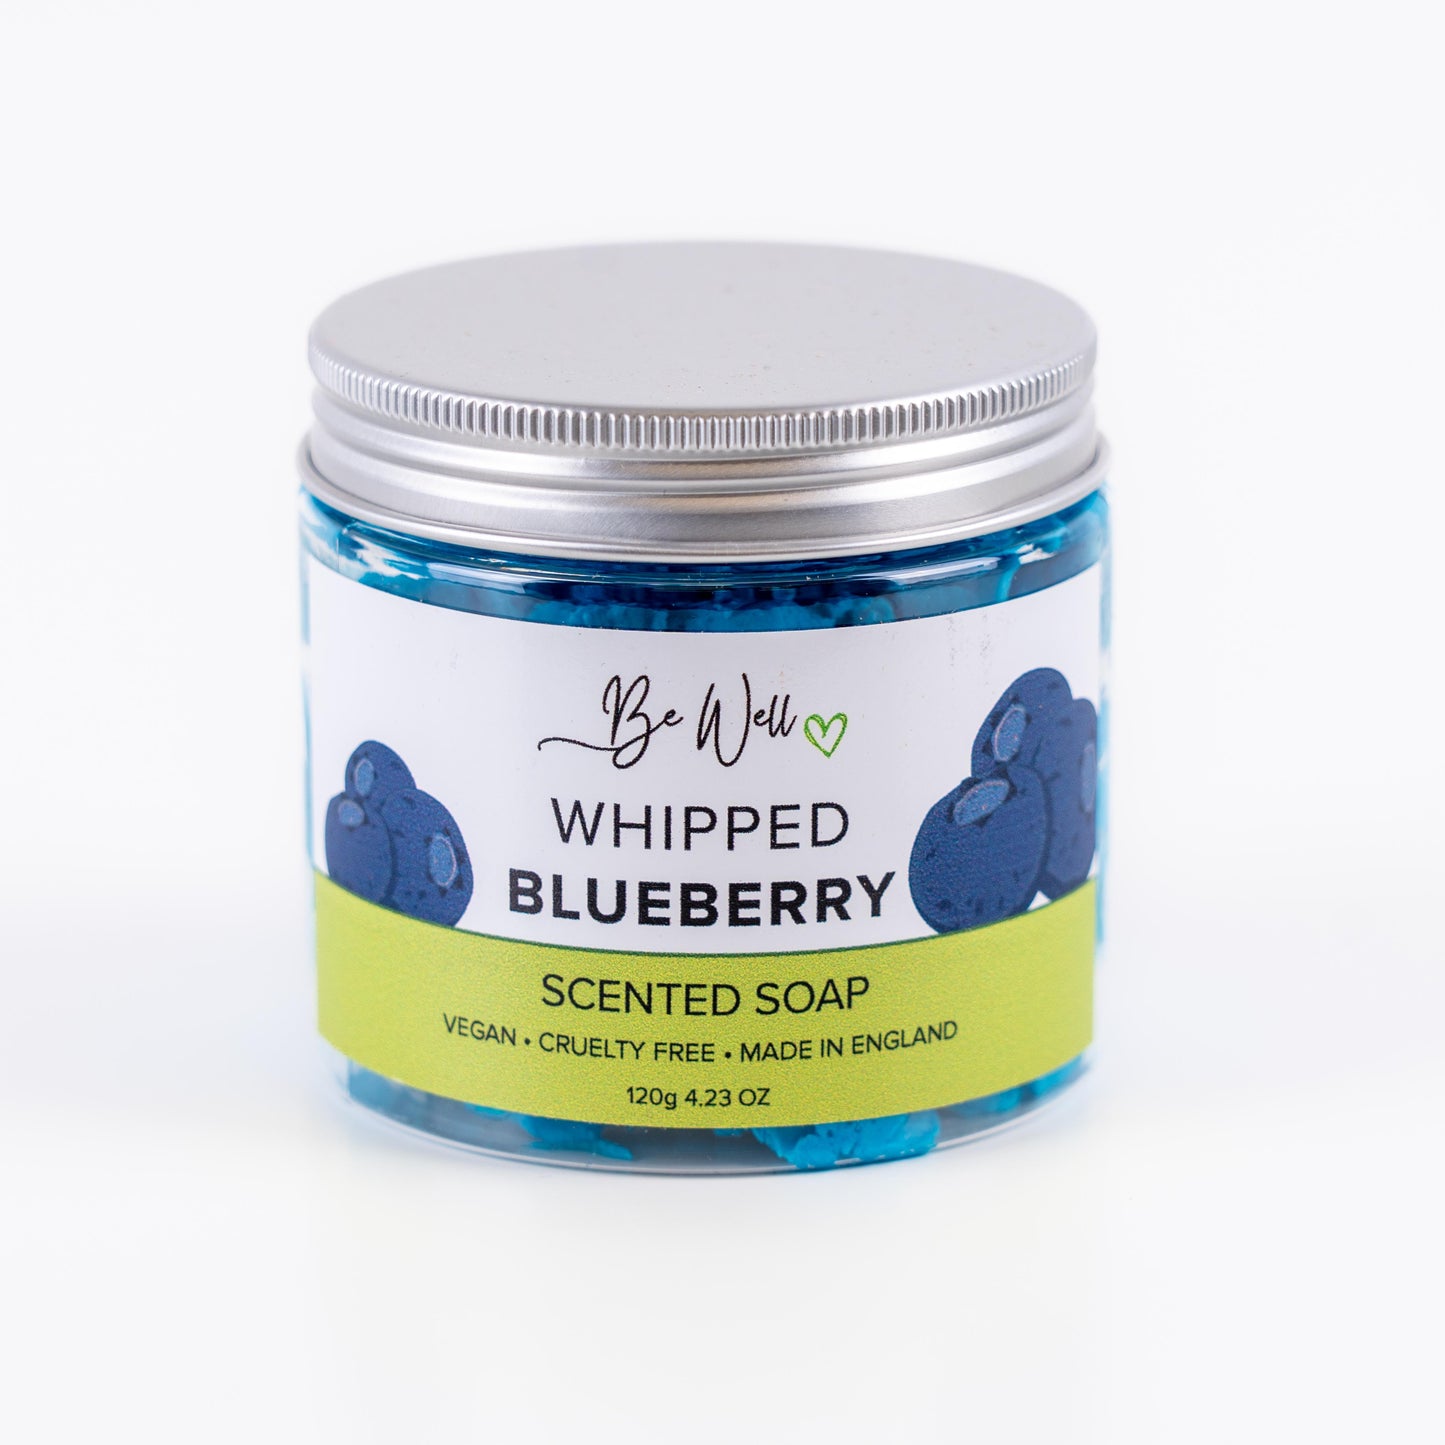 Blueberry Whipped Soap - Vegan, Cruelty-Free